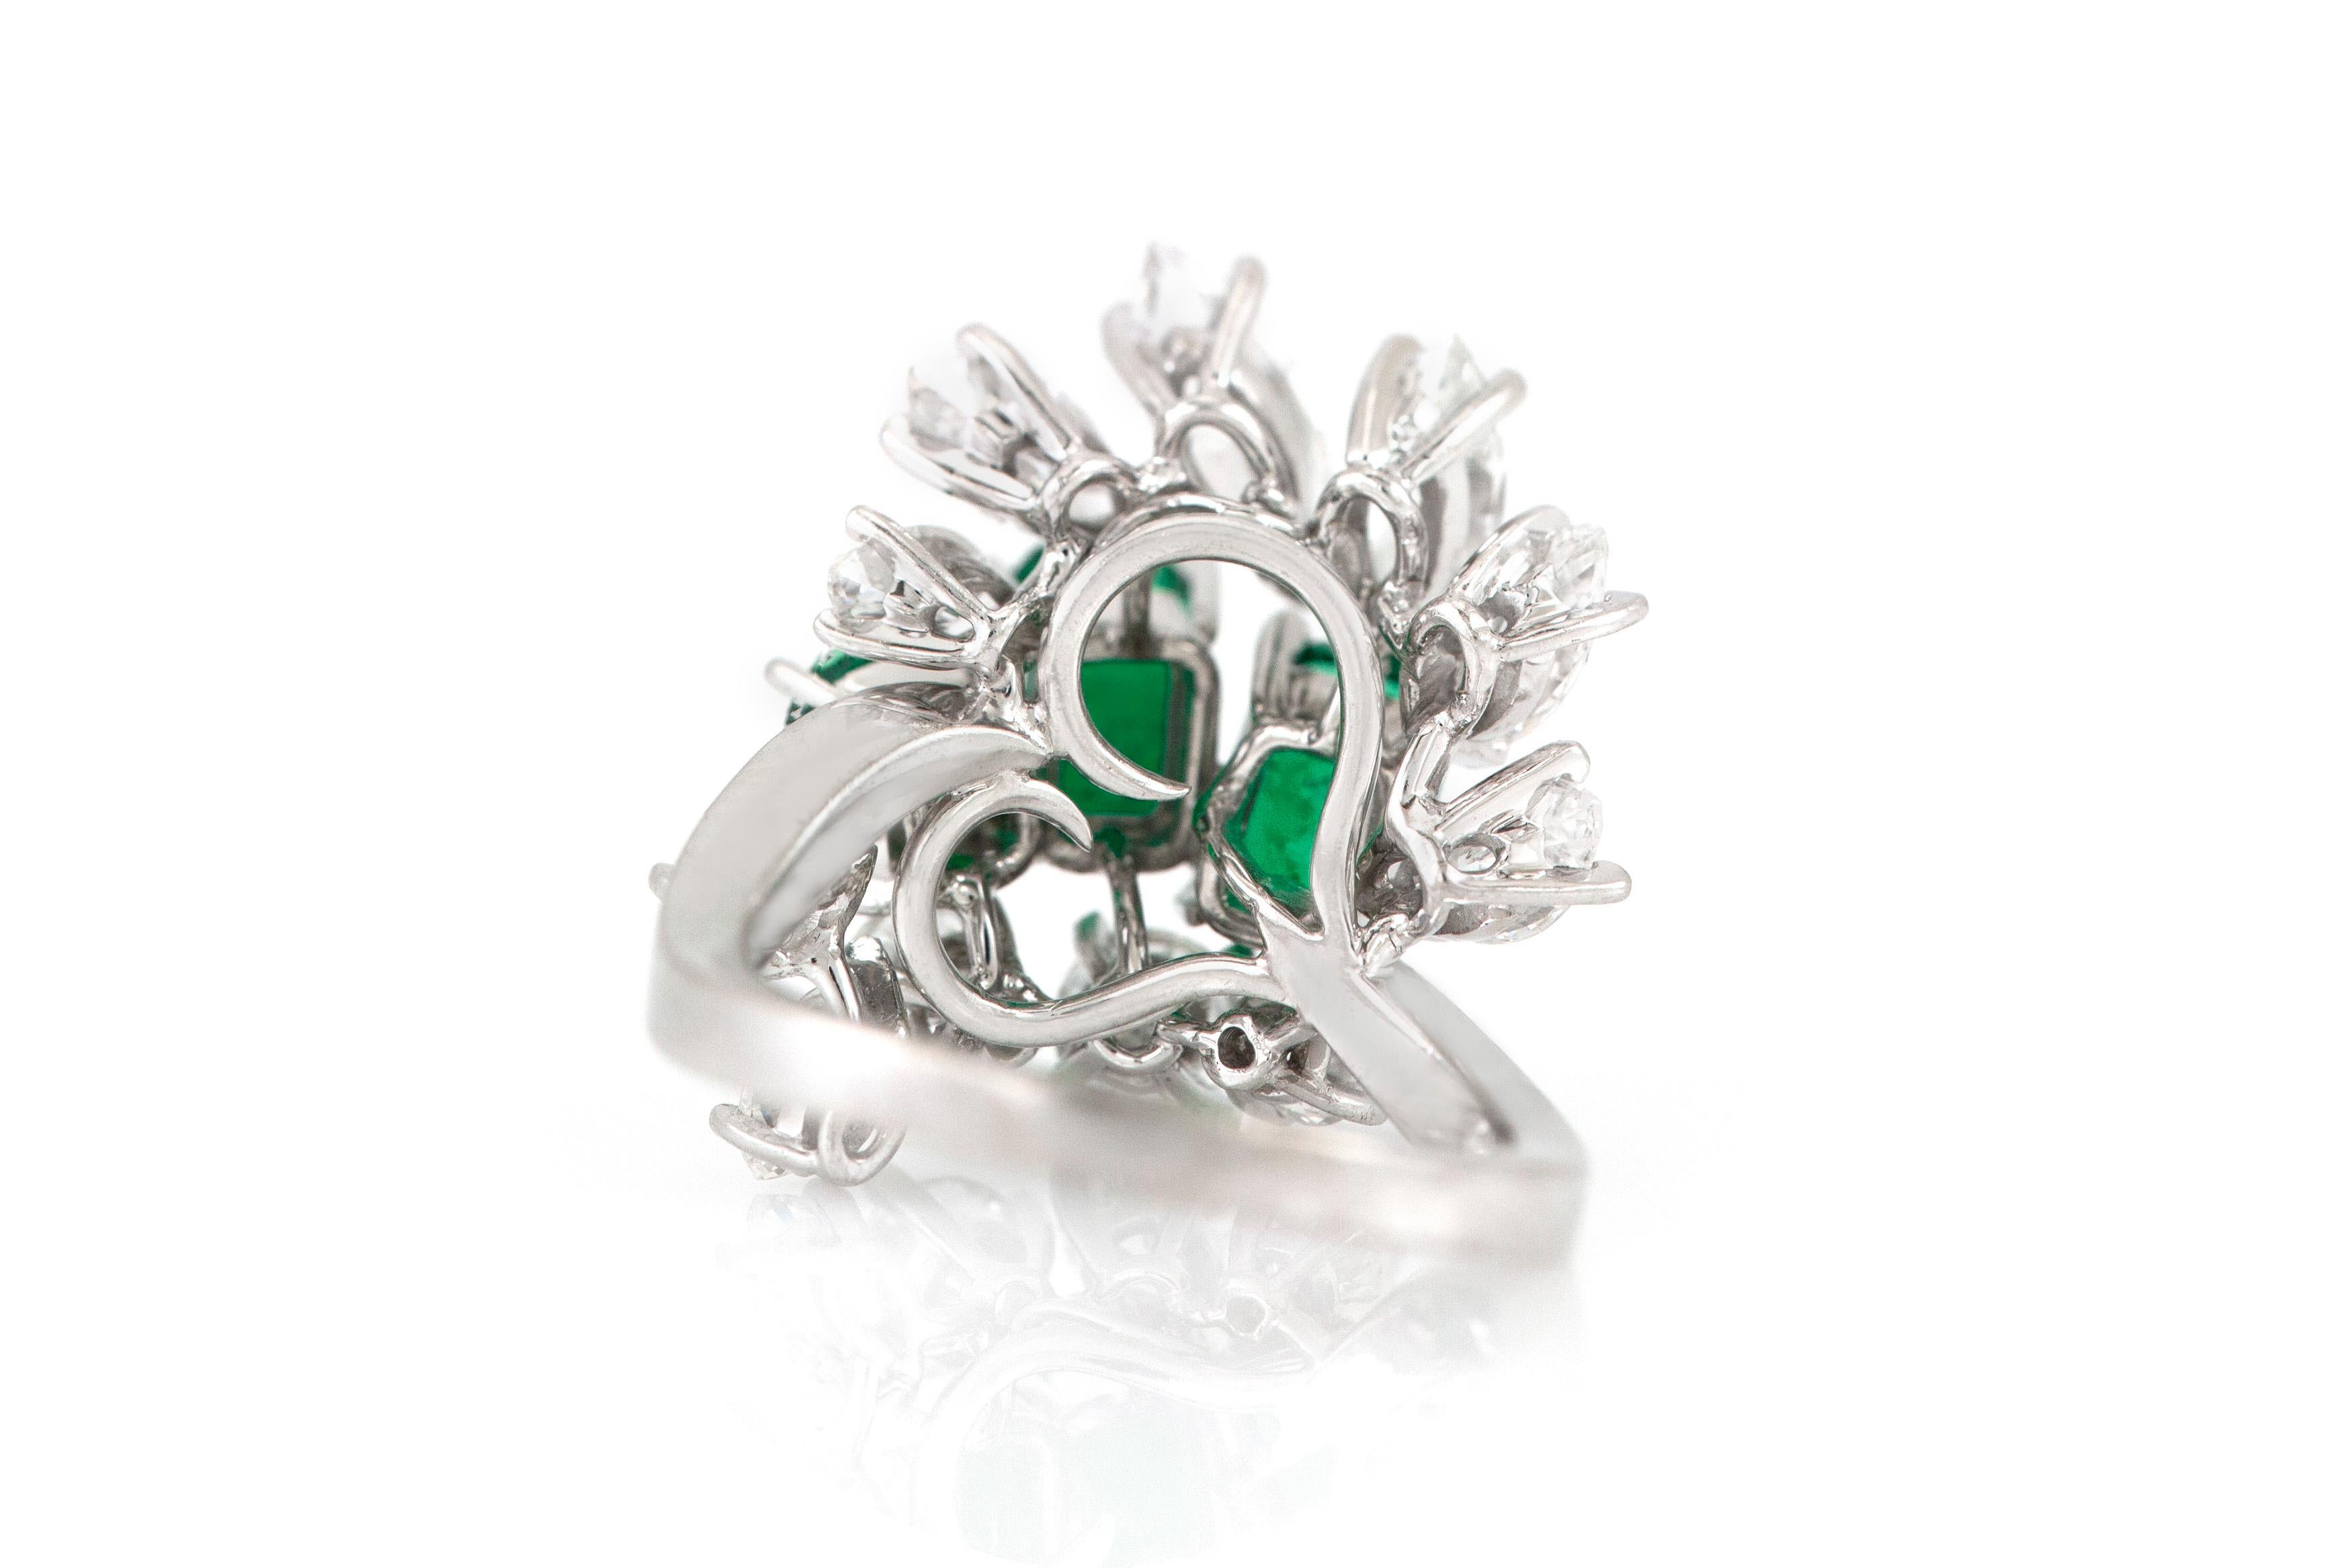 The ring is finely crafted in 18k white gold with emerald weighing approximately total of 2.32 carat. Marquise weighing approximately total of 2.09 carat and diamond weighing approximately total of 0.75 carat. Signed by Meister + paper.